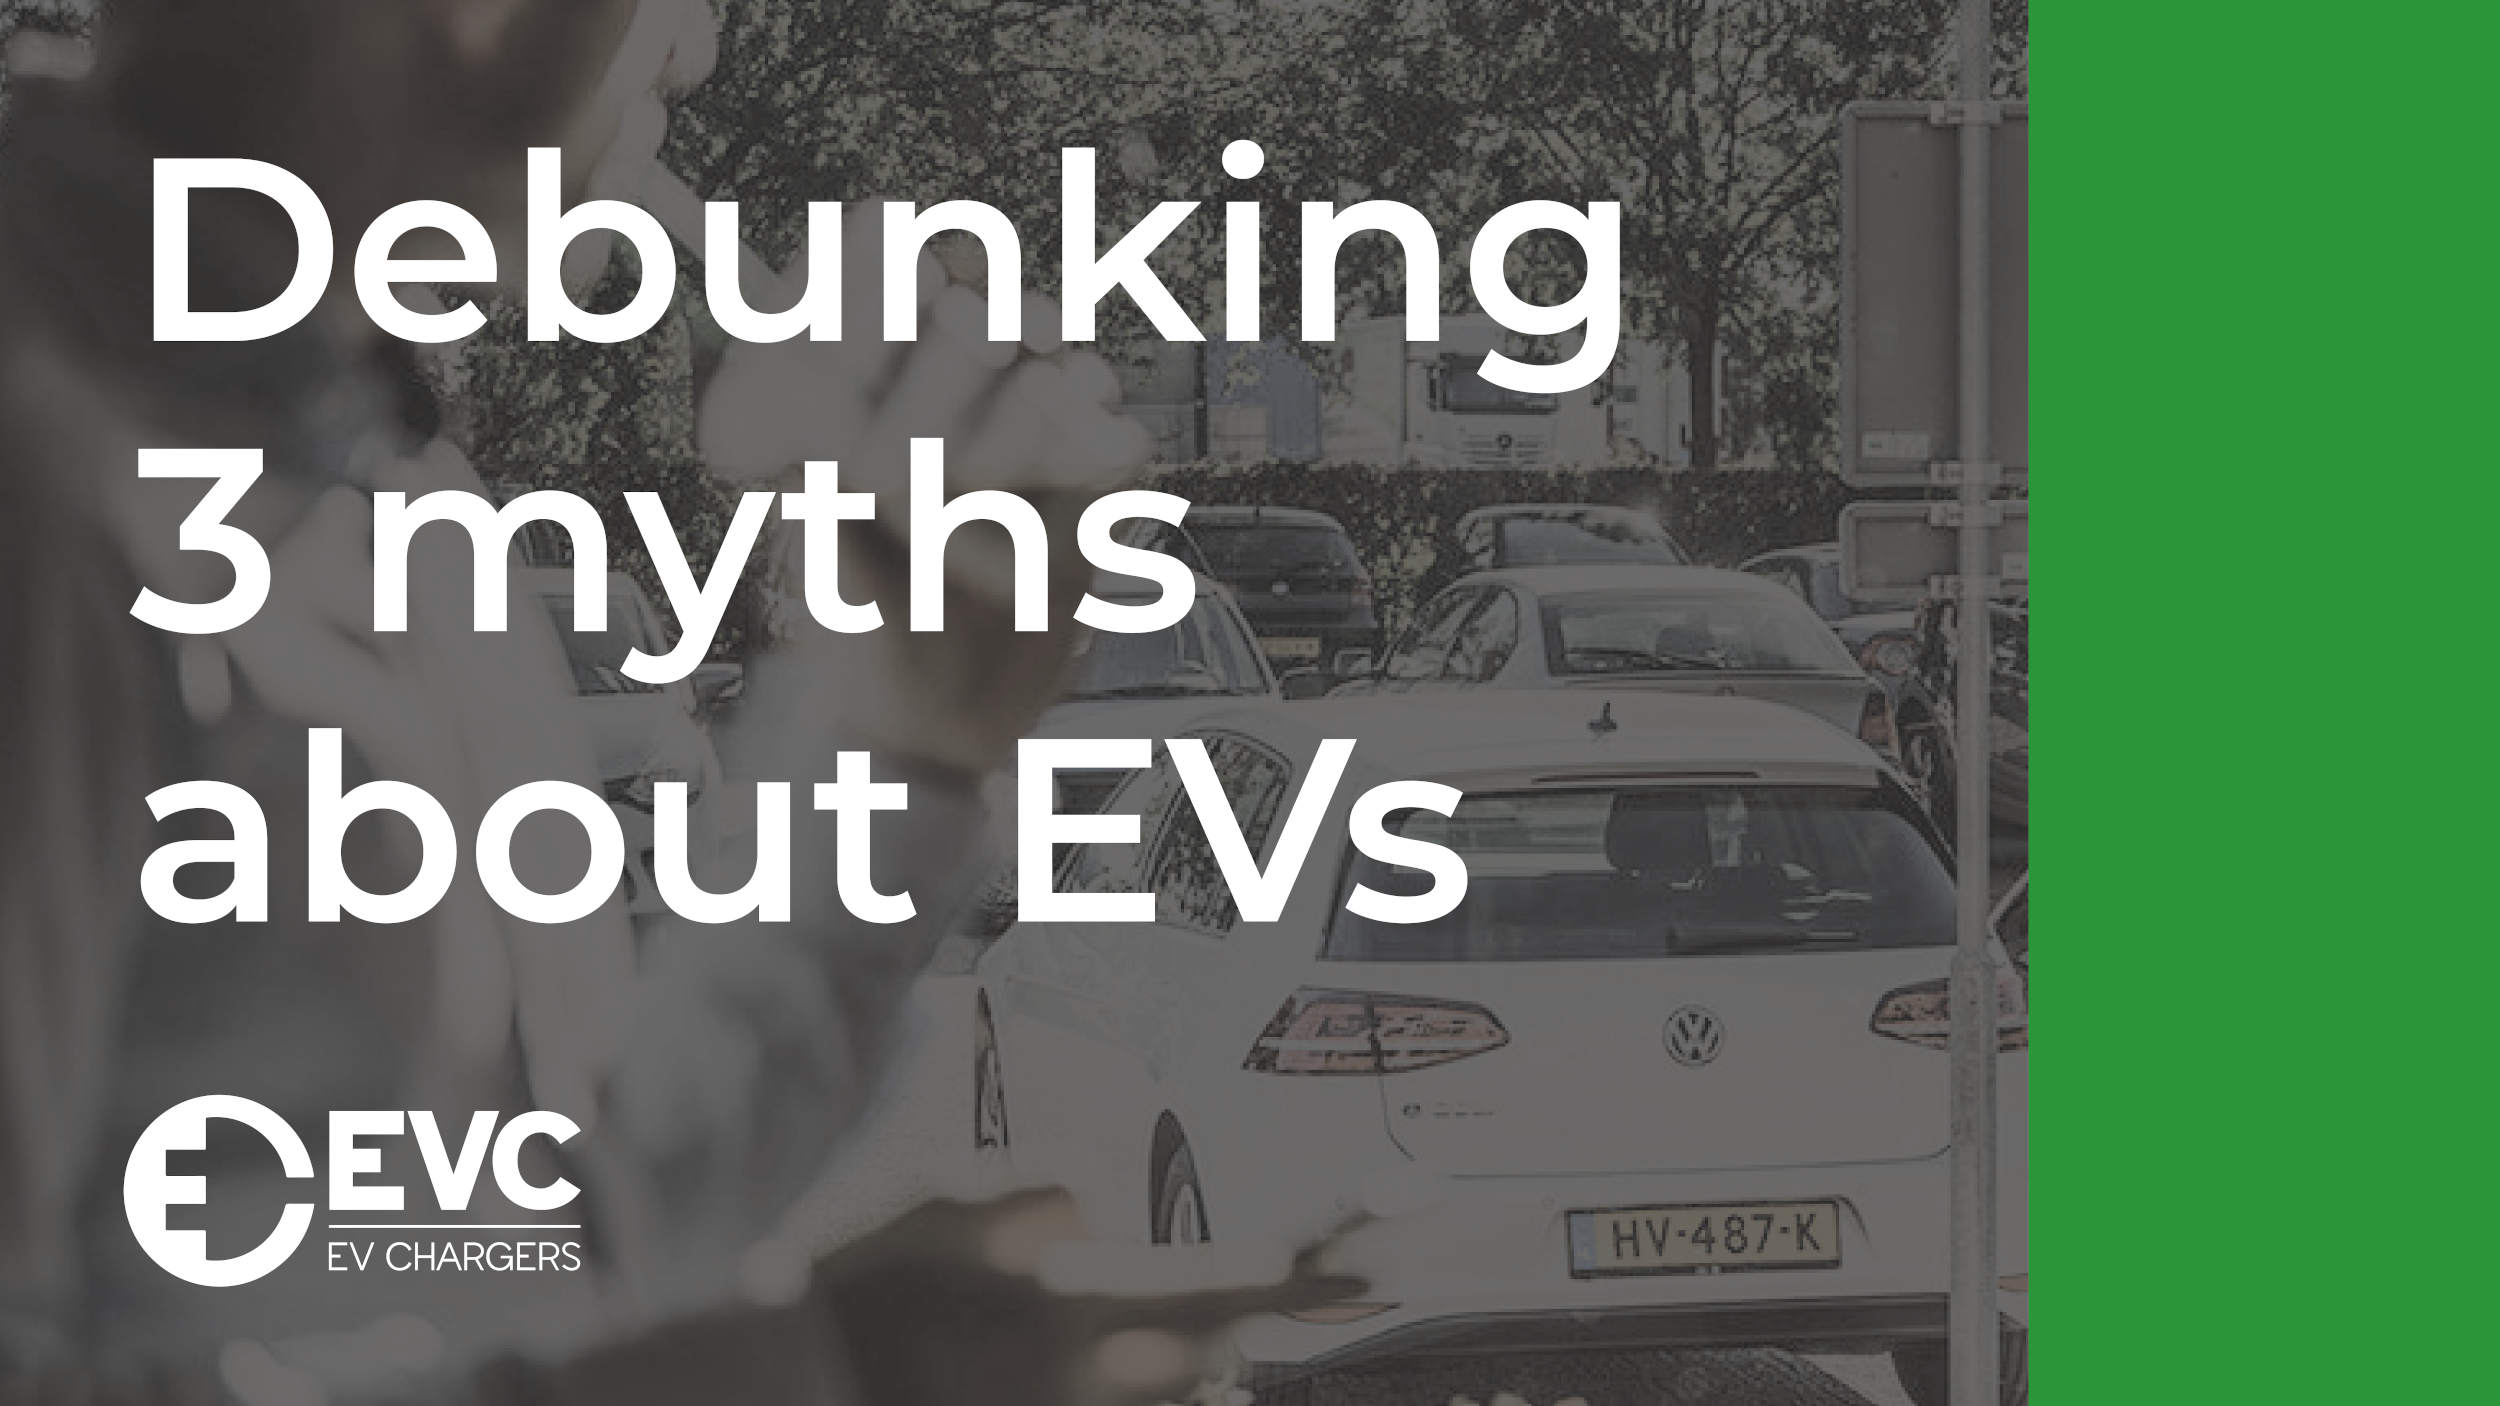 Debunking 3 myths about EVs